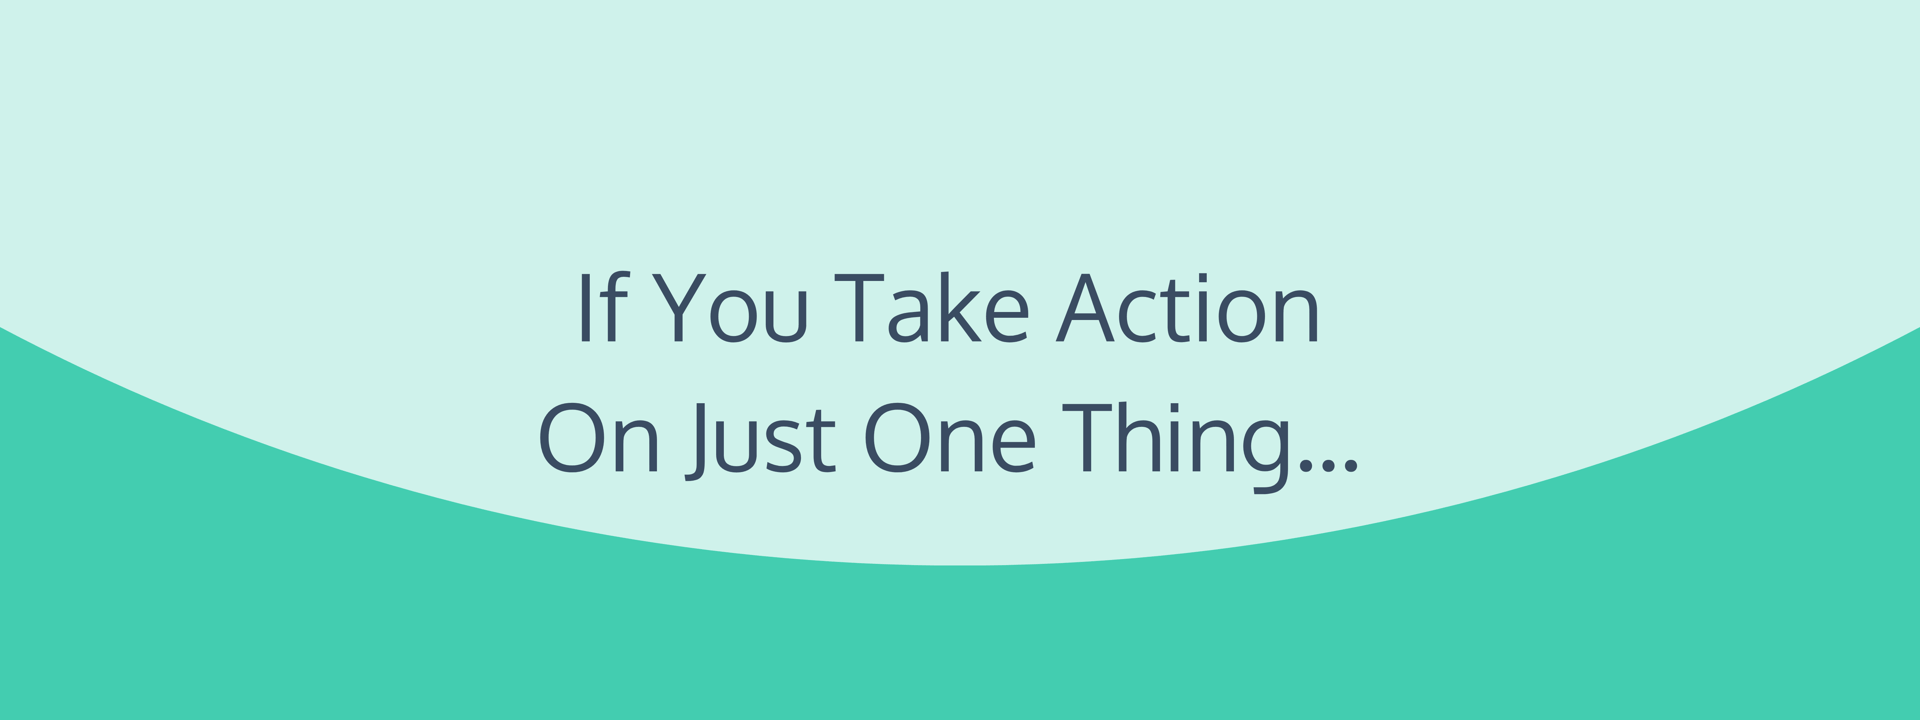 If You Take Action On Just One Thing...